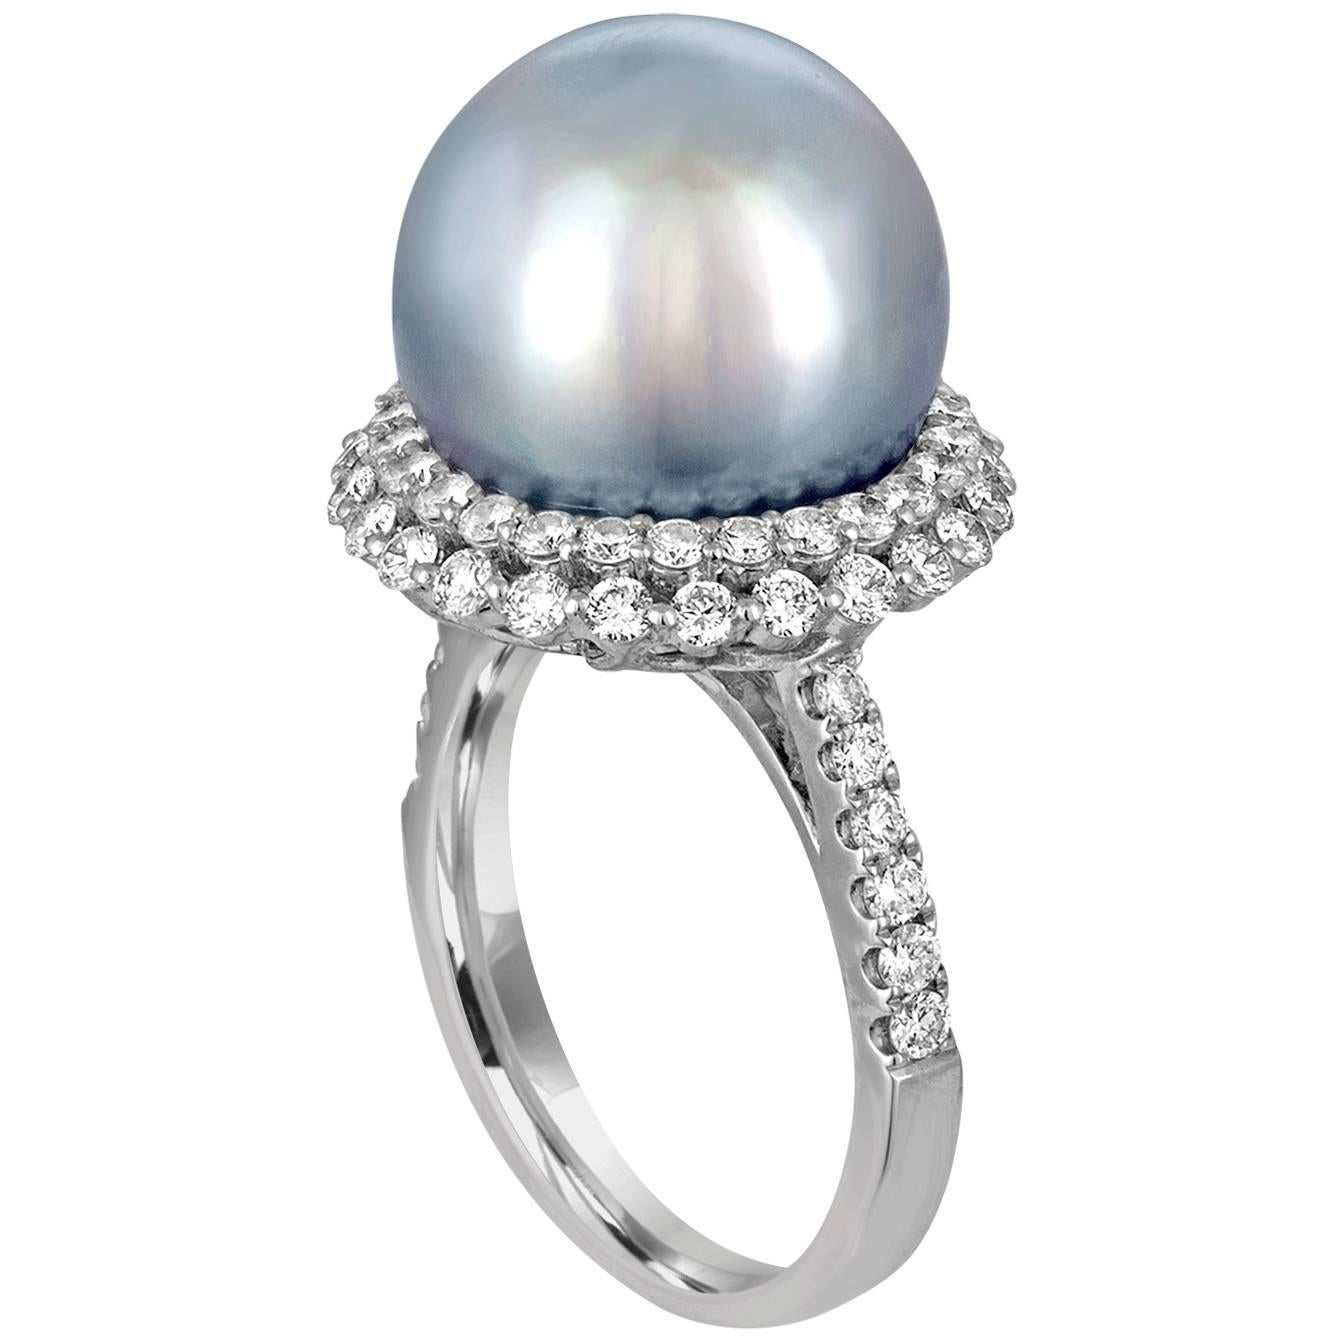 1.18 Carats Diamond And South Sea Pearl Gold Ring